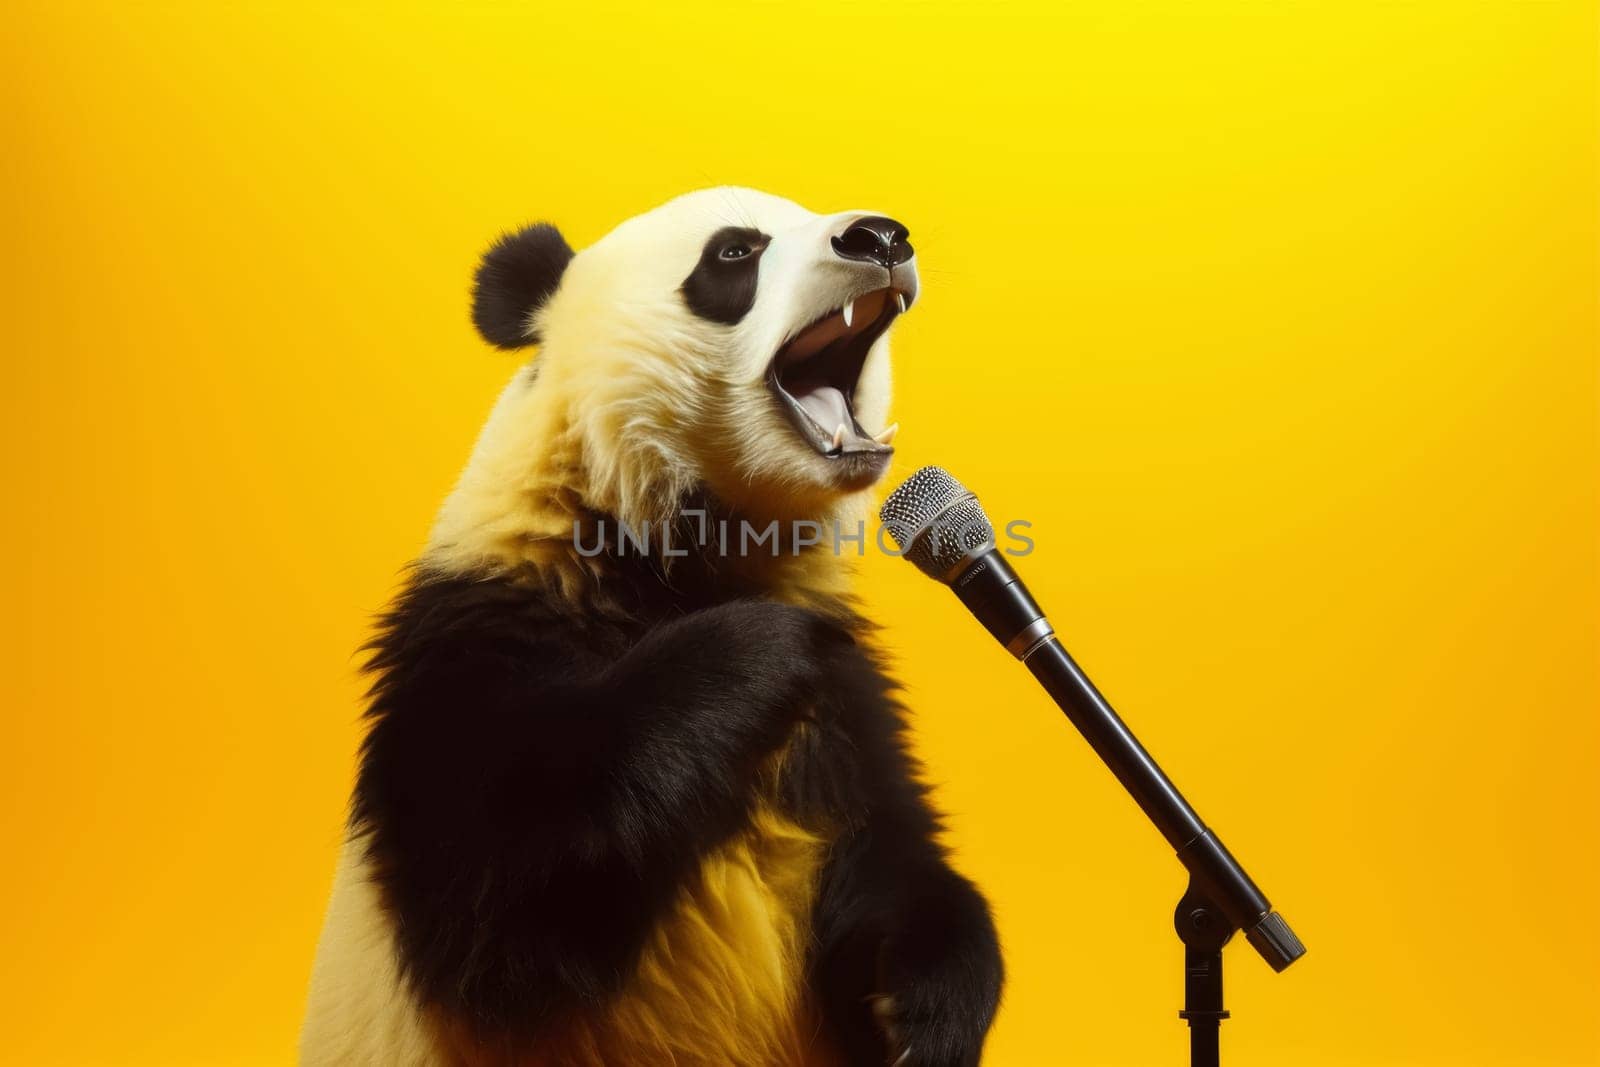 Singing Panda with Microphone on Stage by andreyz